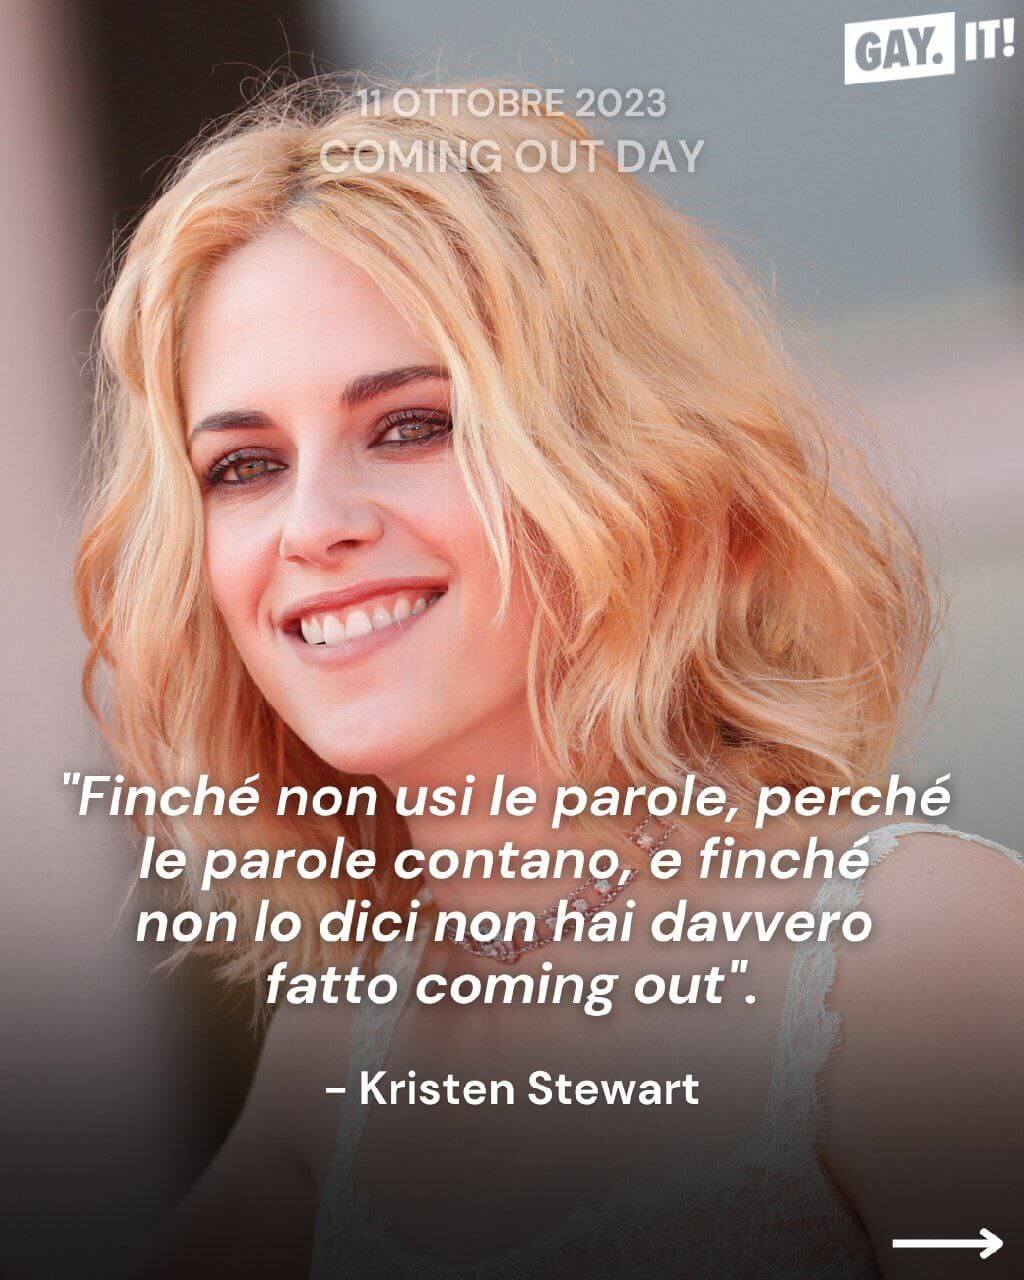 Coming Out: le parole di 10 persone famose - Coming Out Kristen Stewart - Gay.it